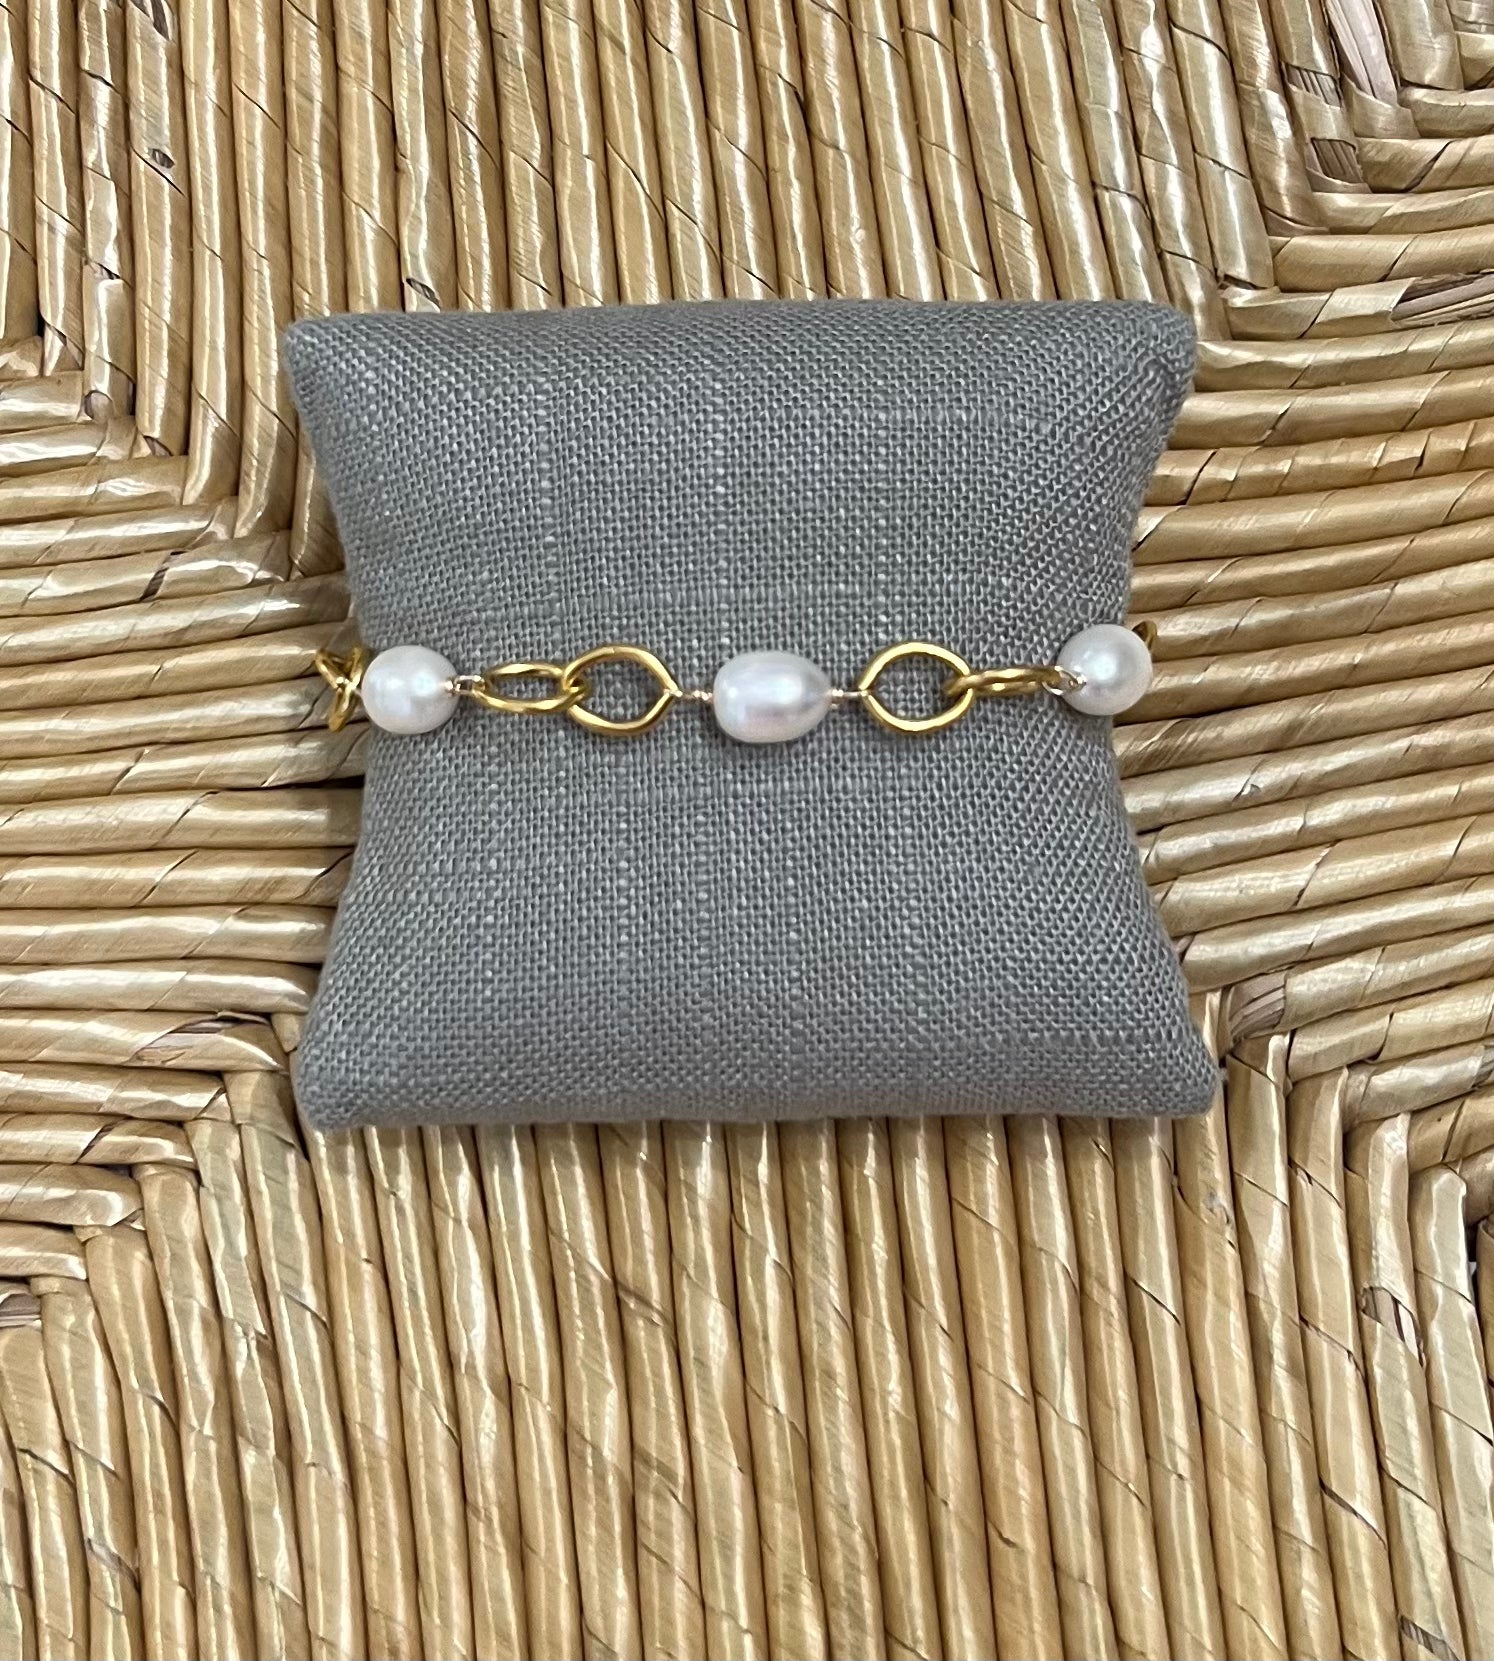 Bead and Chain Bracelet